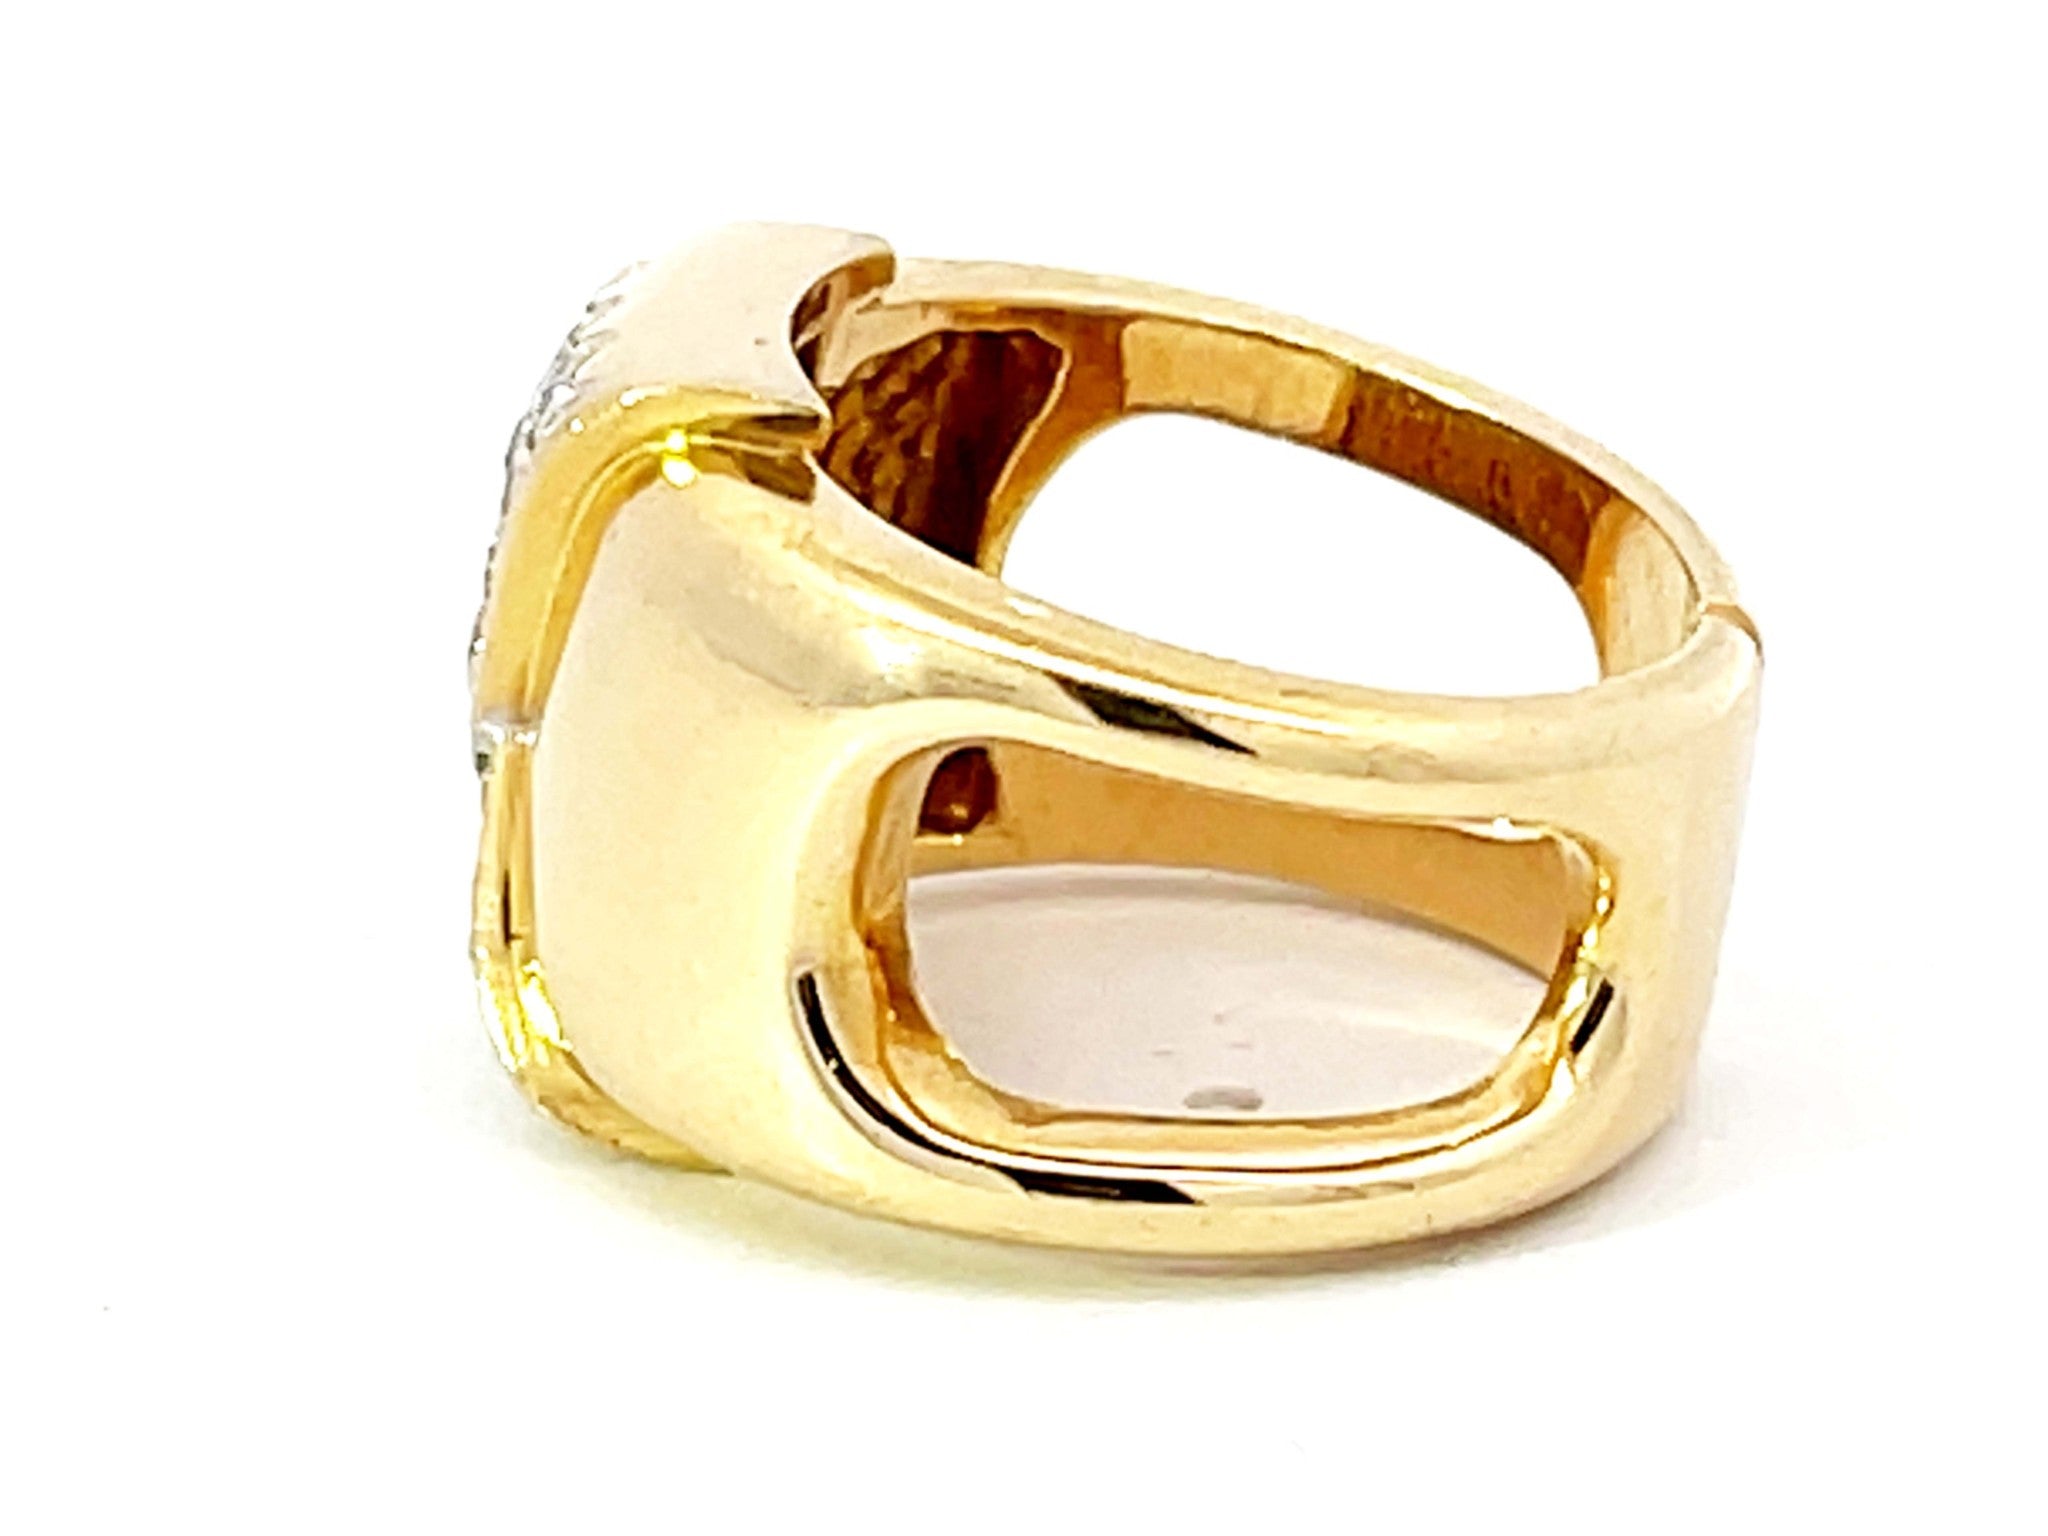 Wide Band Diamond Ring with Cutout Shoulders in 18k Yellow Gold